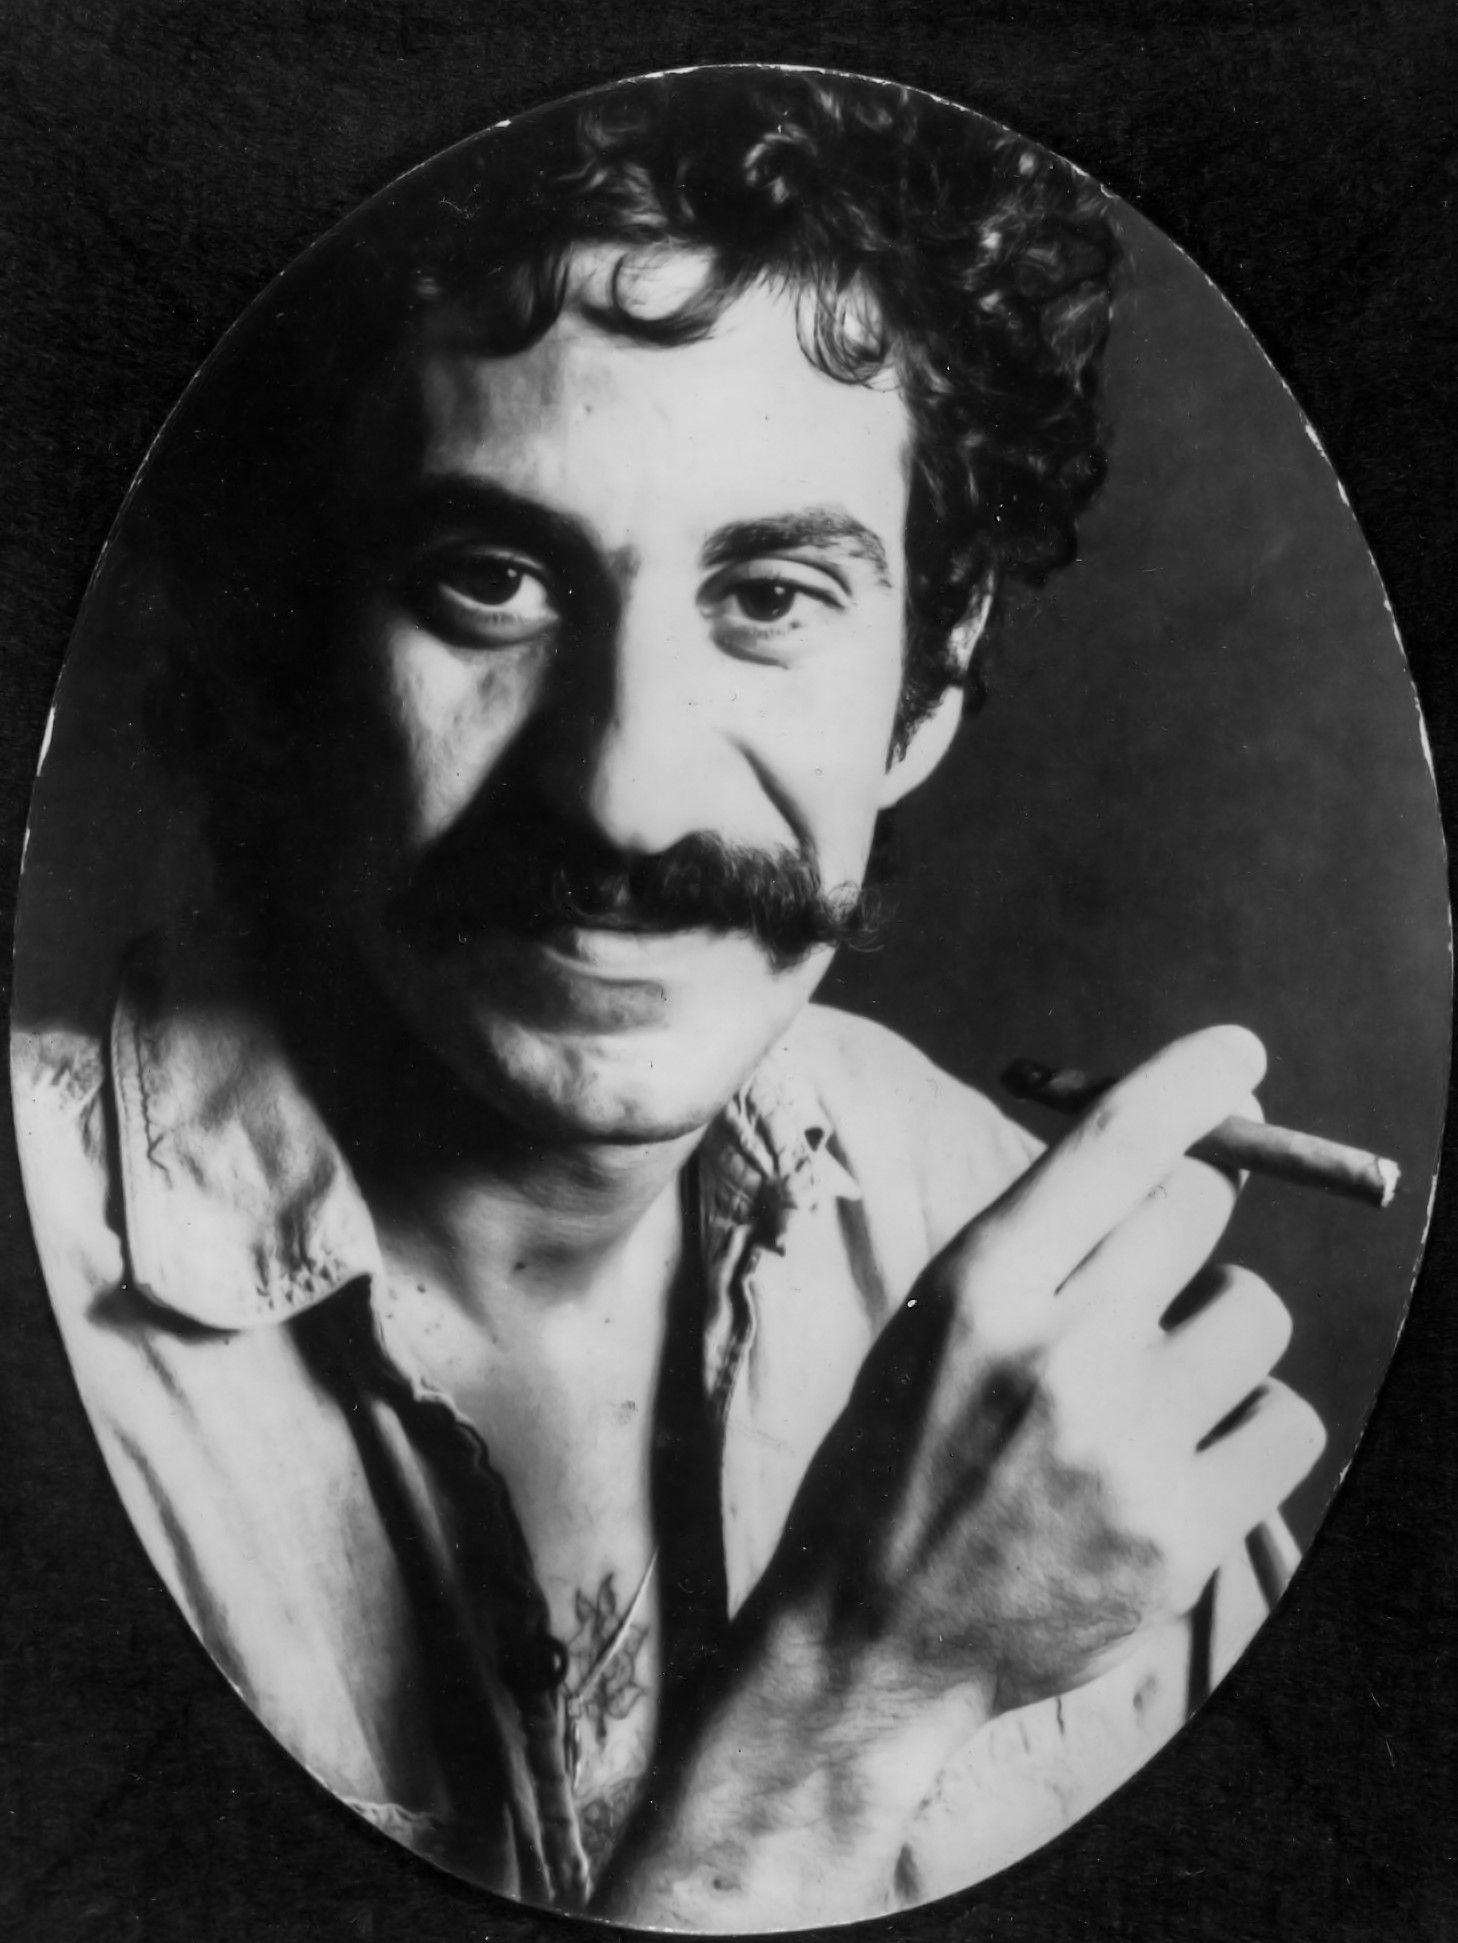 Jim Croce Popular Singer and Songwriter Had Abruzzo Roots The